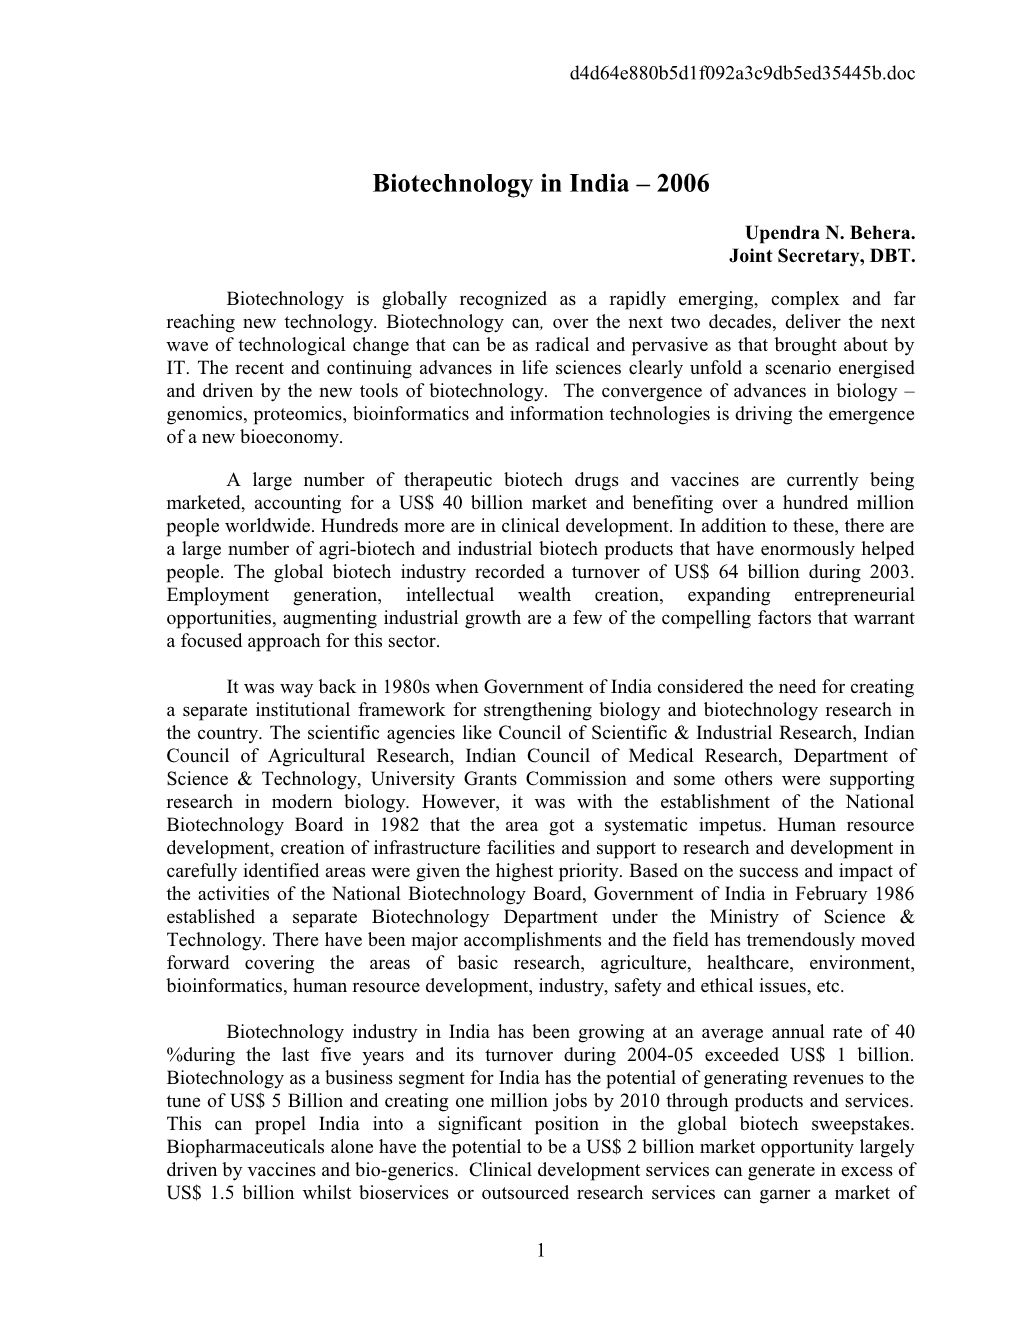 Biotechnology in India 2006